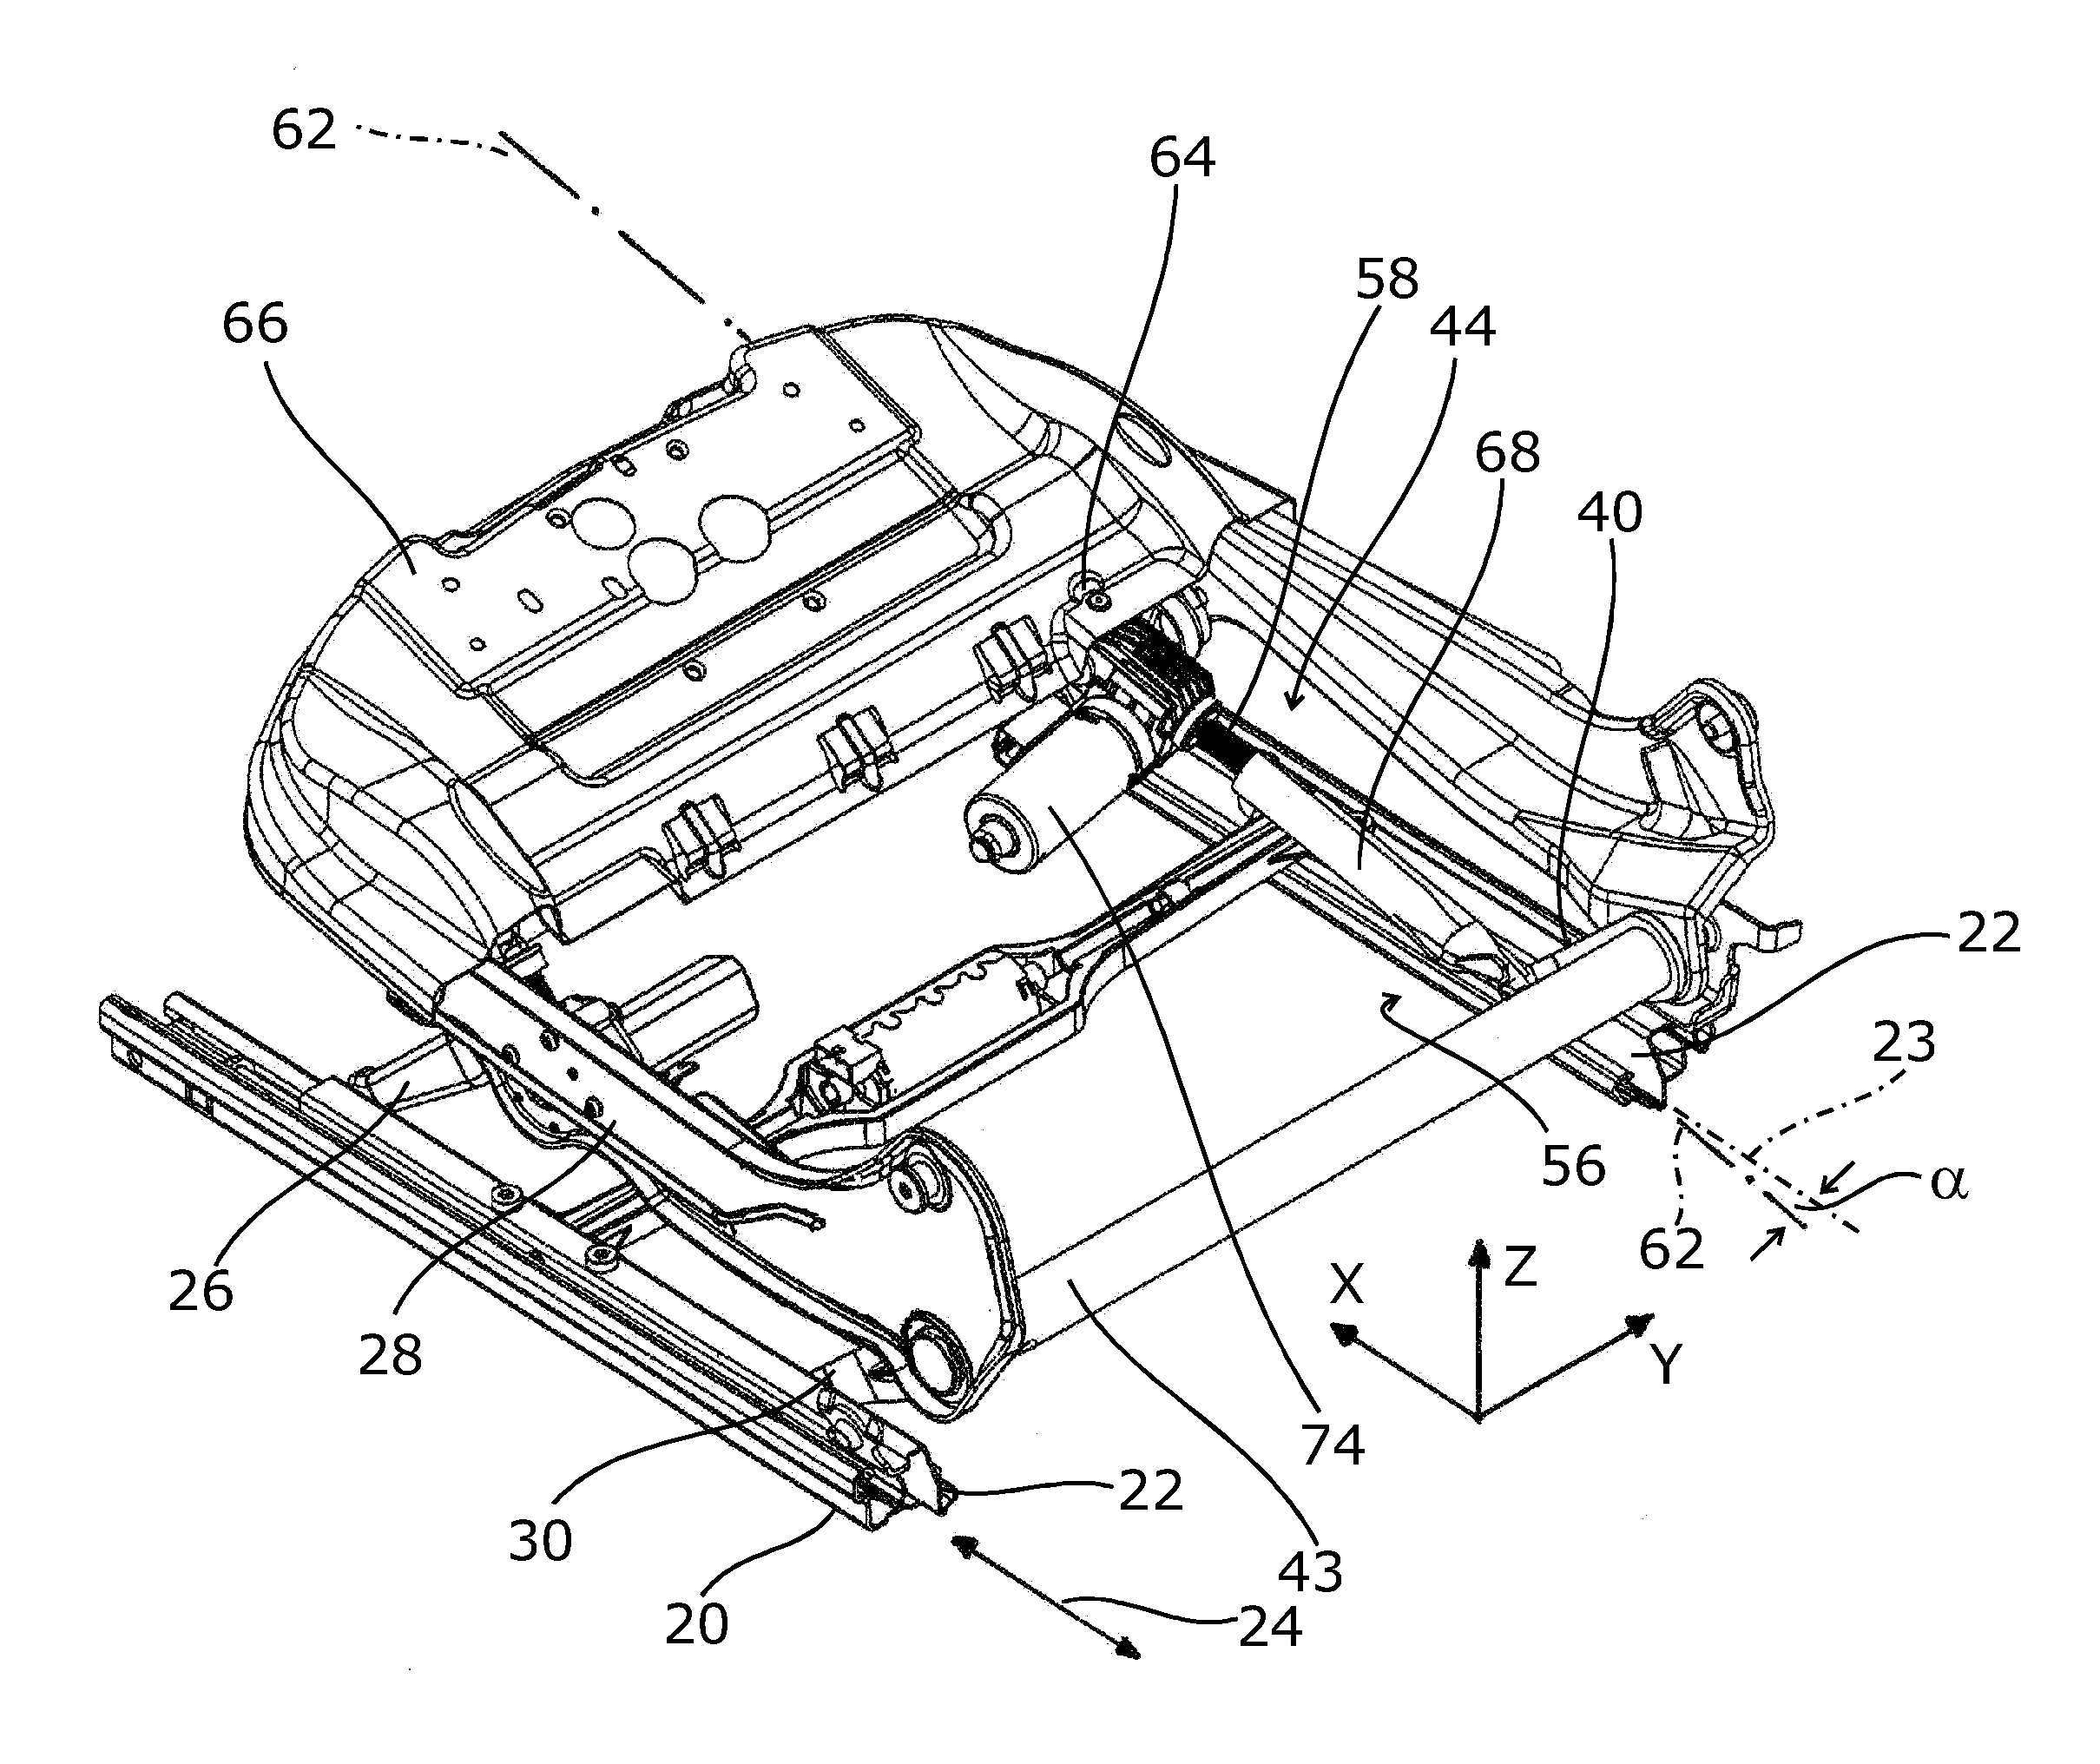 Height-Adjustable Motor Vehicle Seat with a Spindle Drive